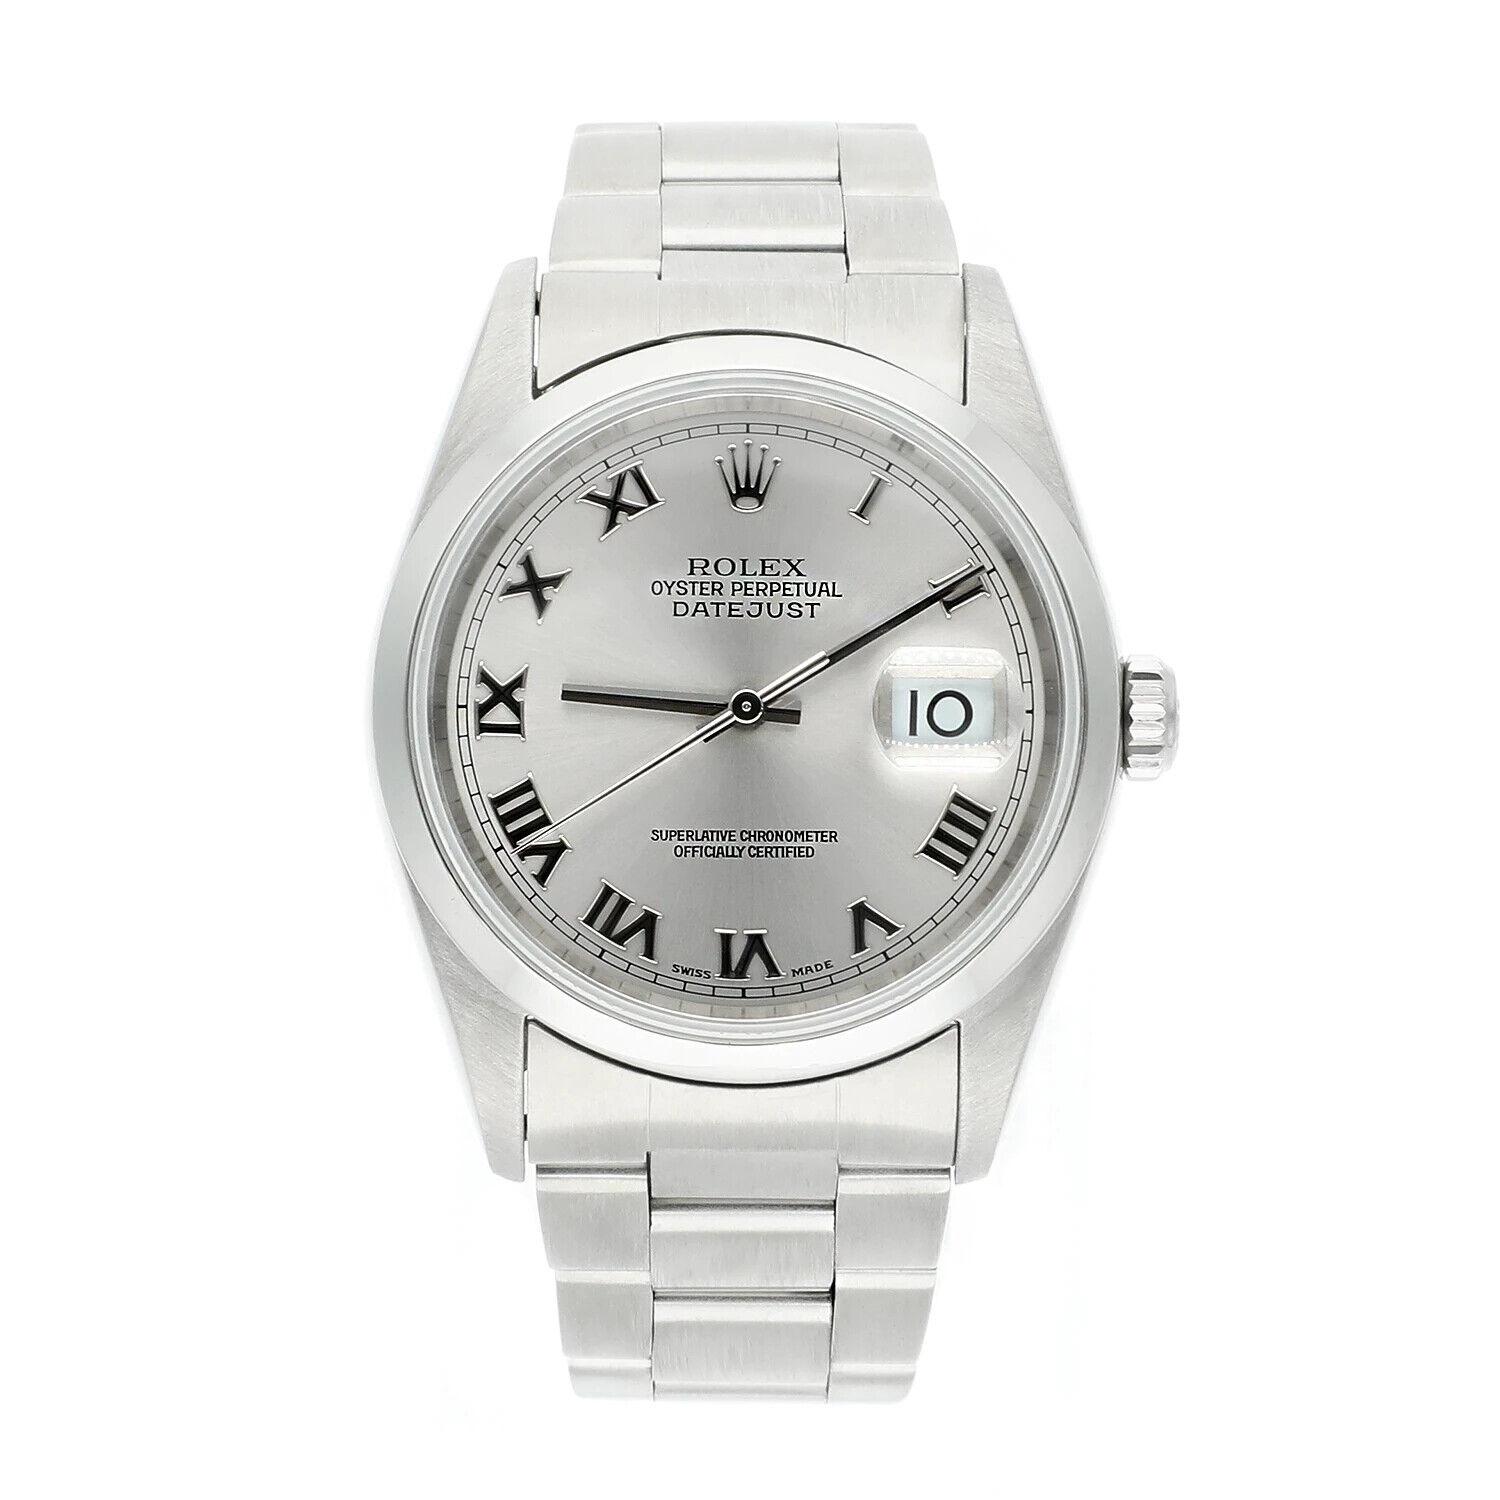 Rolex Datejust Mens Stainless Steel Watch with Oyster Band and Silver Dial 16200, Circa 2001-2002, Y series.
This watch has been professionally polished, serviced and is in perfect working condition. Authenticity guaranteed!

This model features